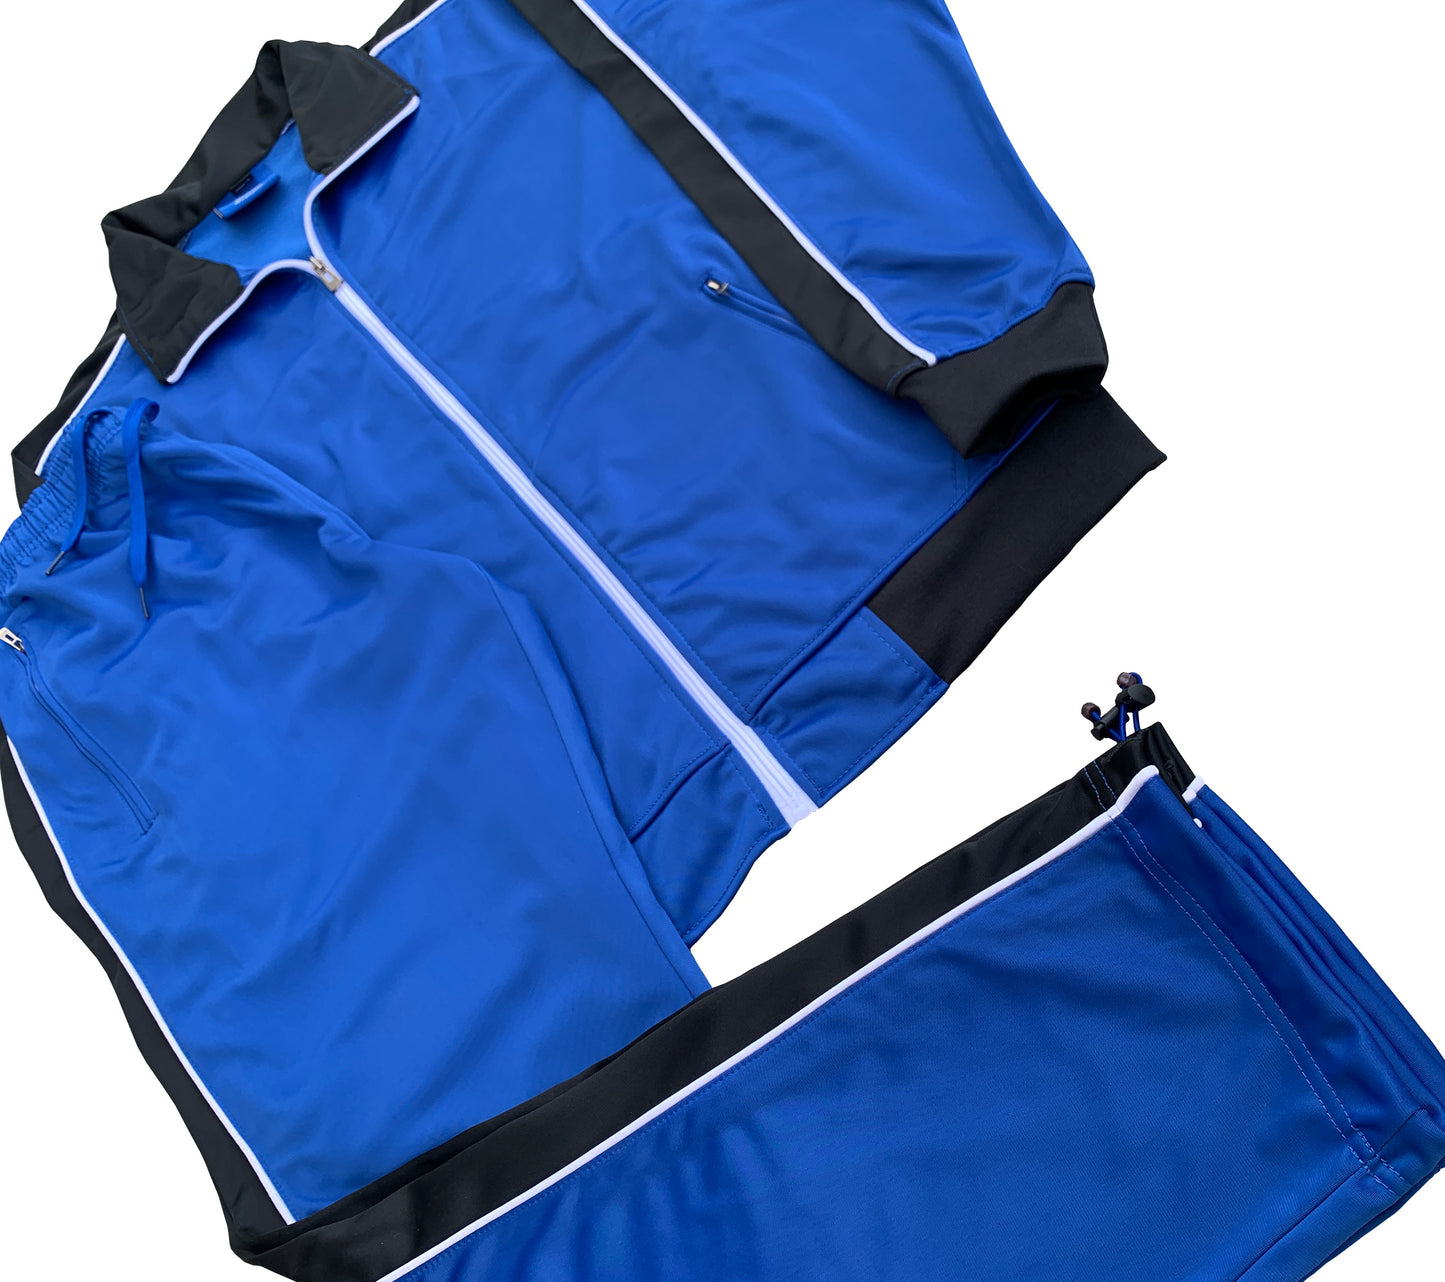 Men’s 2-piece Tracksuit Series Three Activewear Slim Fit pants with Track Jacket Matching Suit